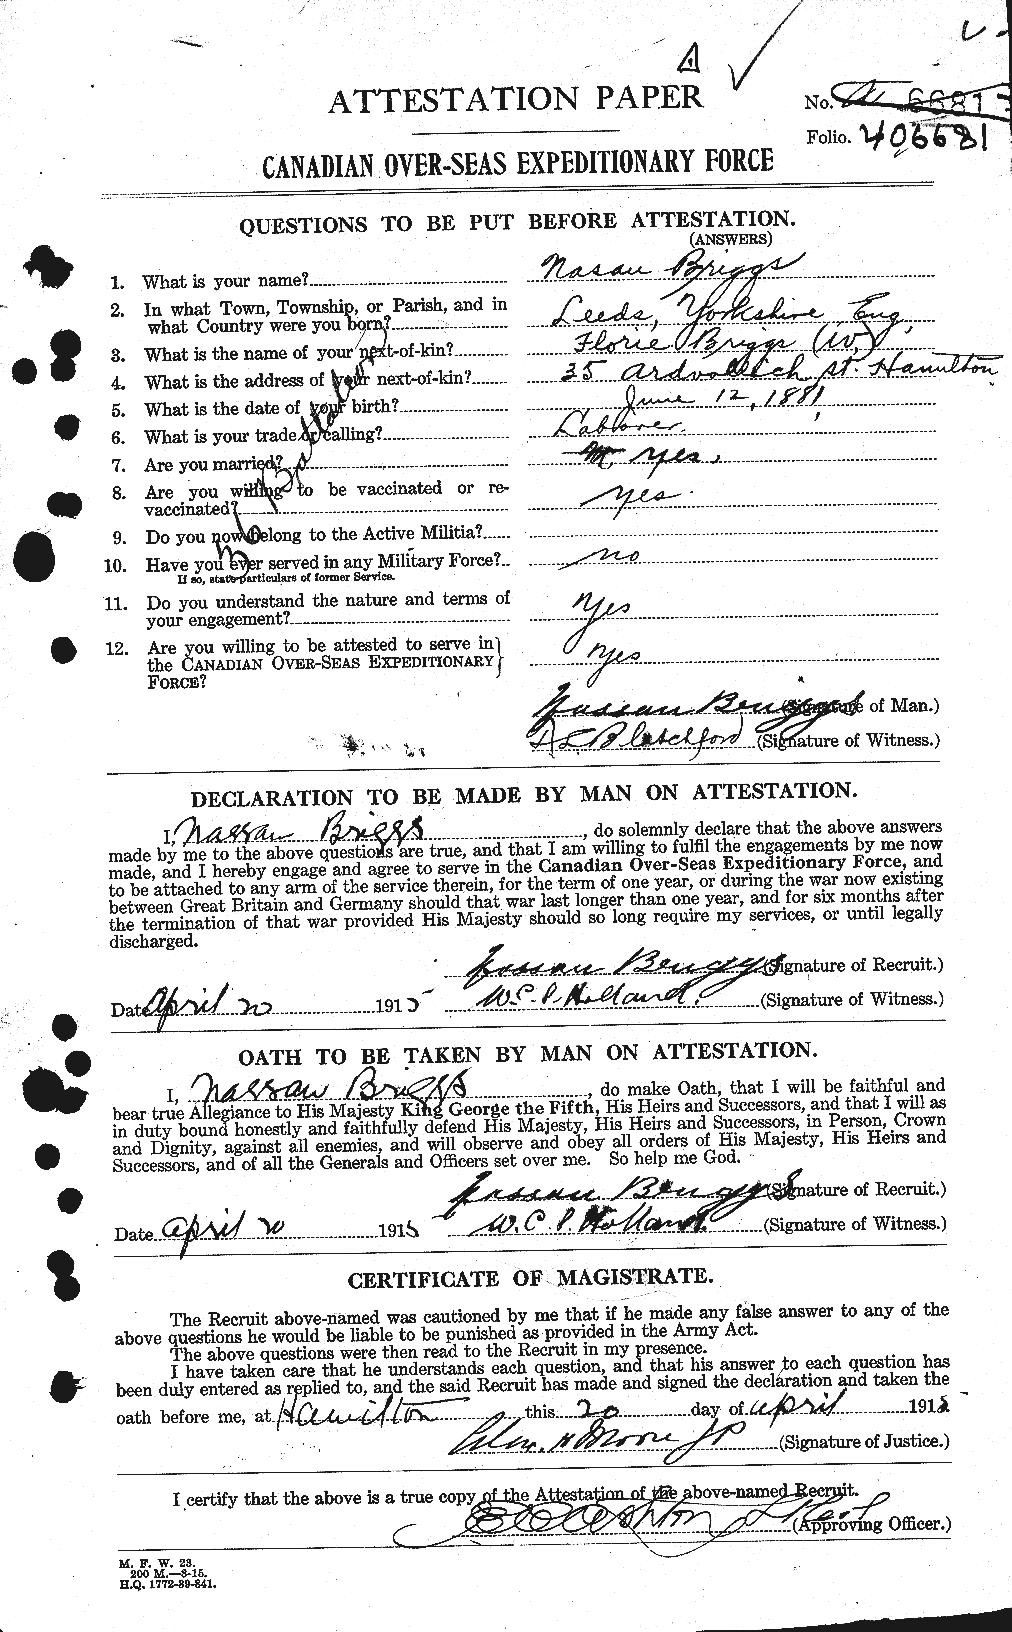 Personnel Records of the First World War - CEF 264077a